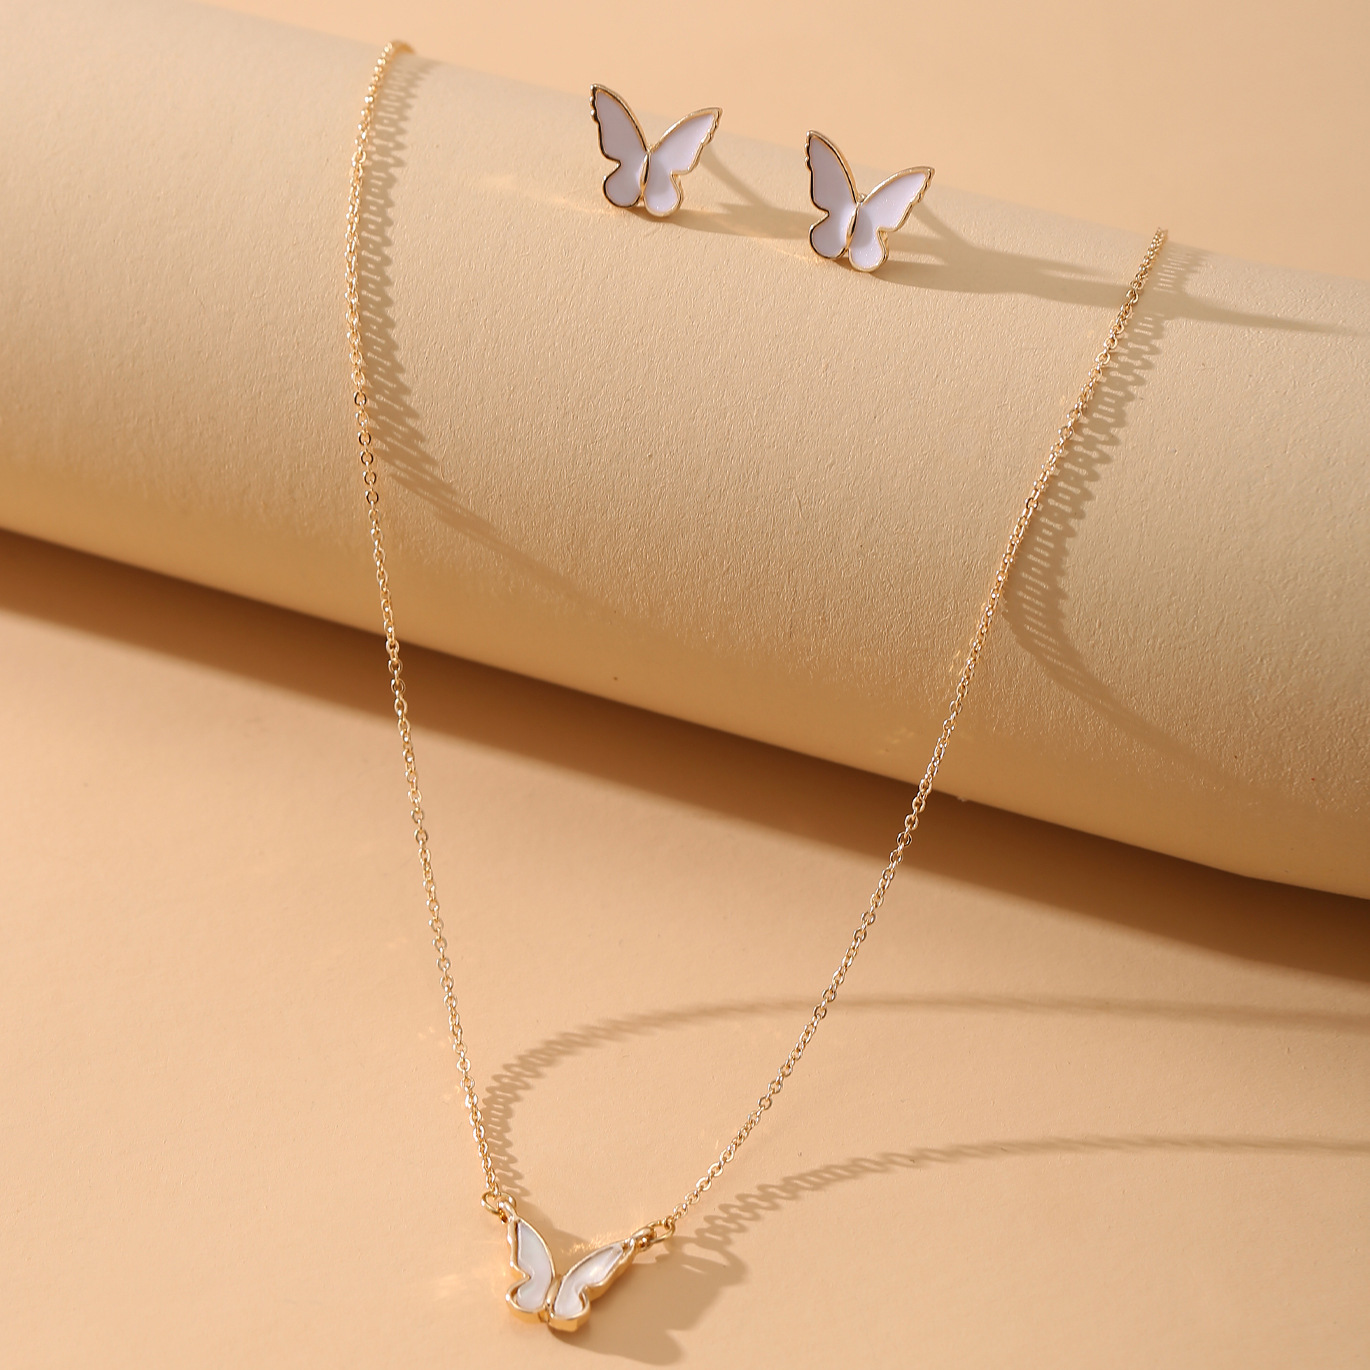 White butterfly accessories set